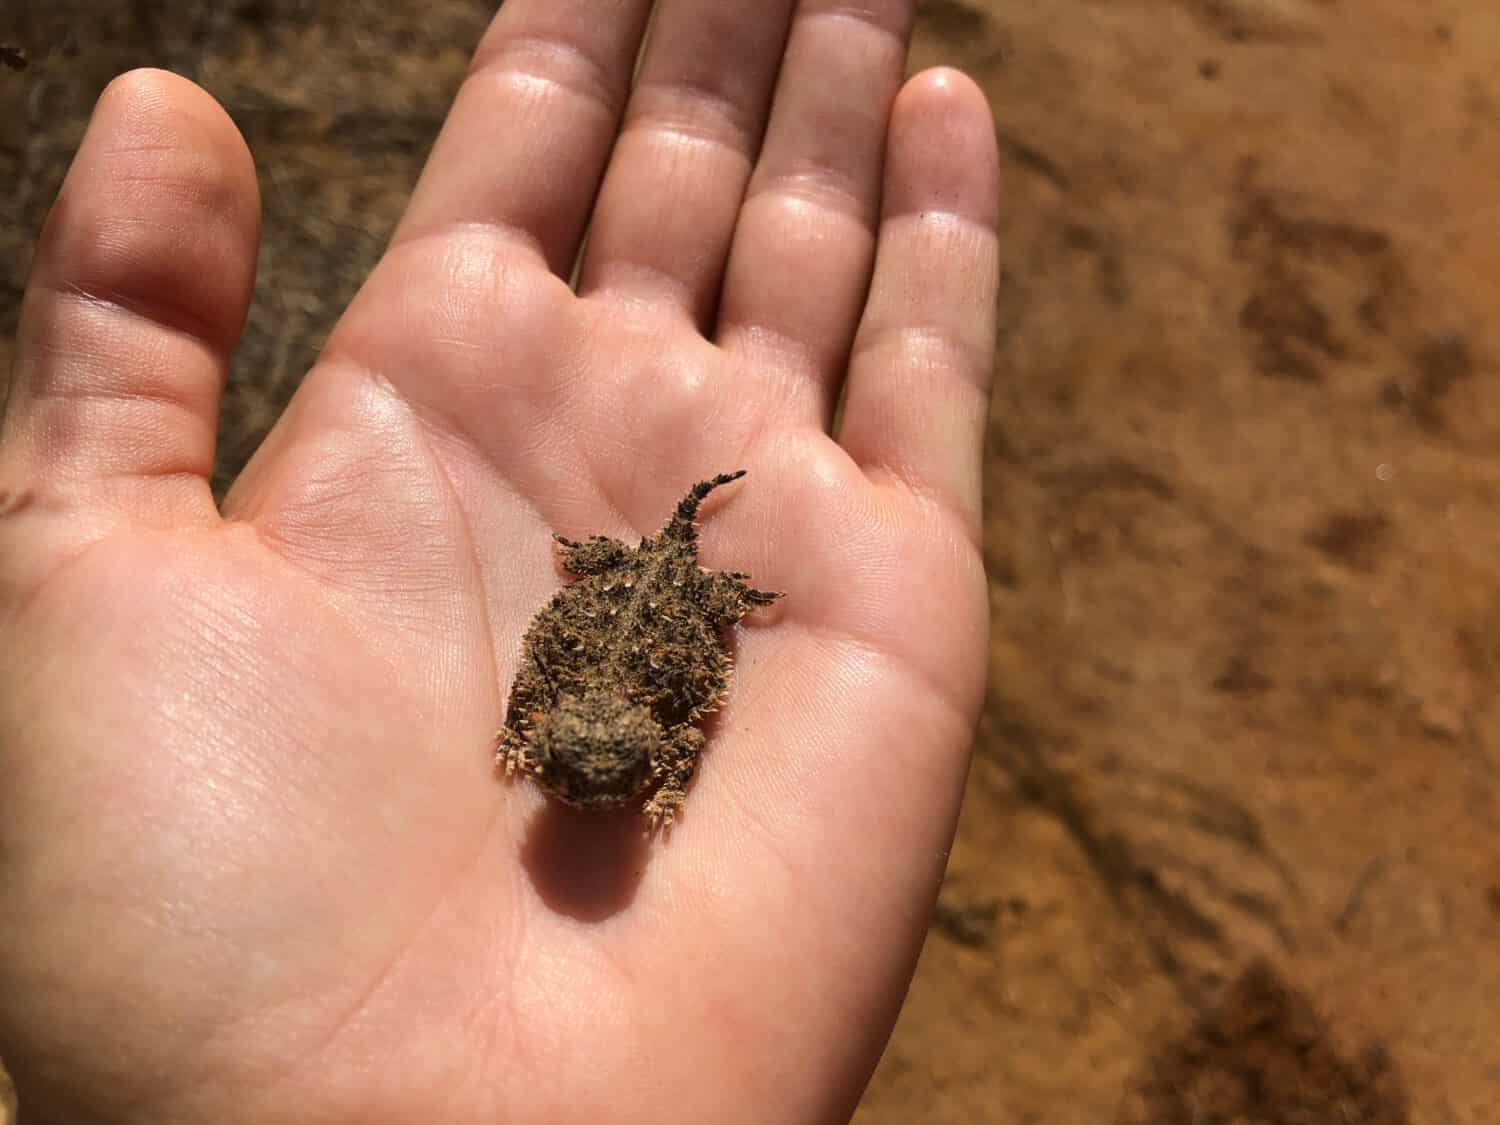 Holding pygmy short horned lizard, north-east San Diego